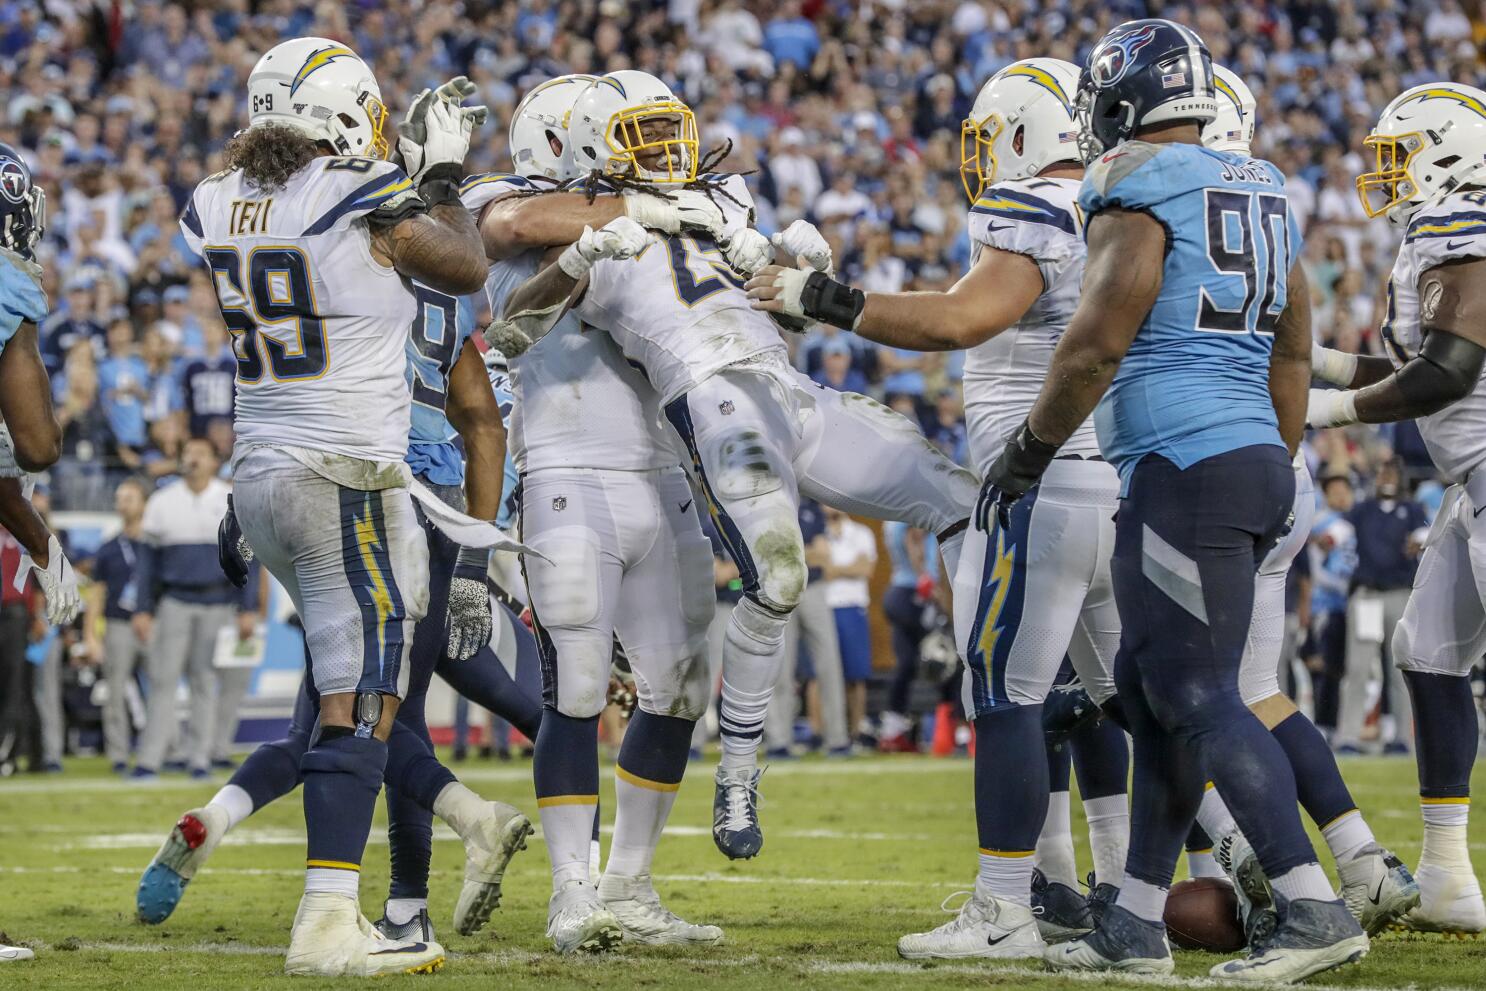 NFL 2019: Los Angeles Chargers vs Tennessee Titans OCT 20, Sports